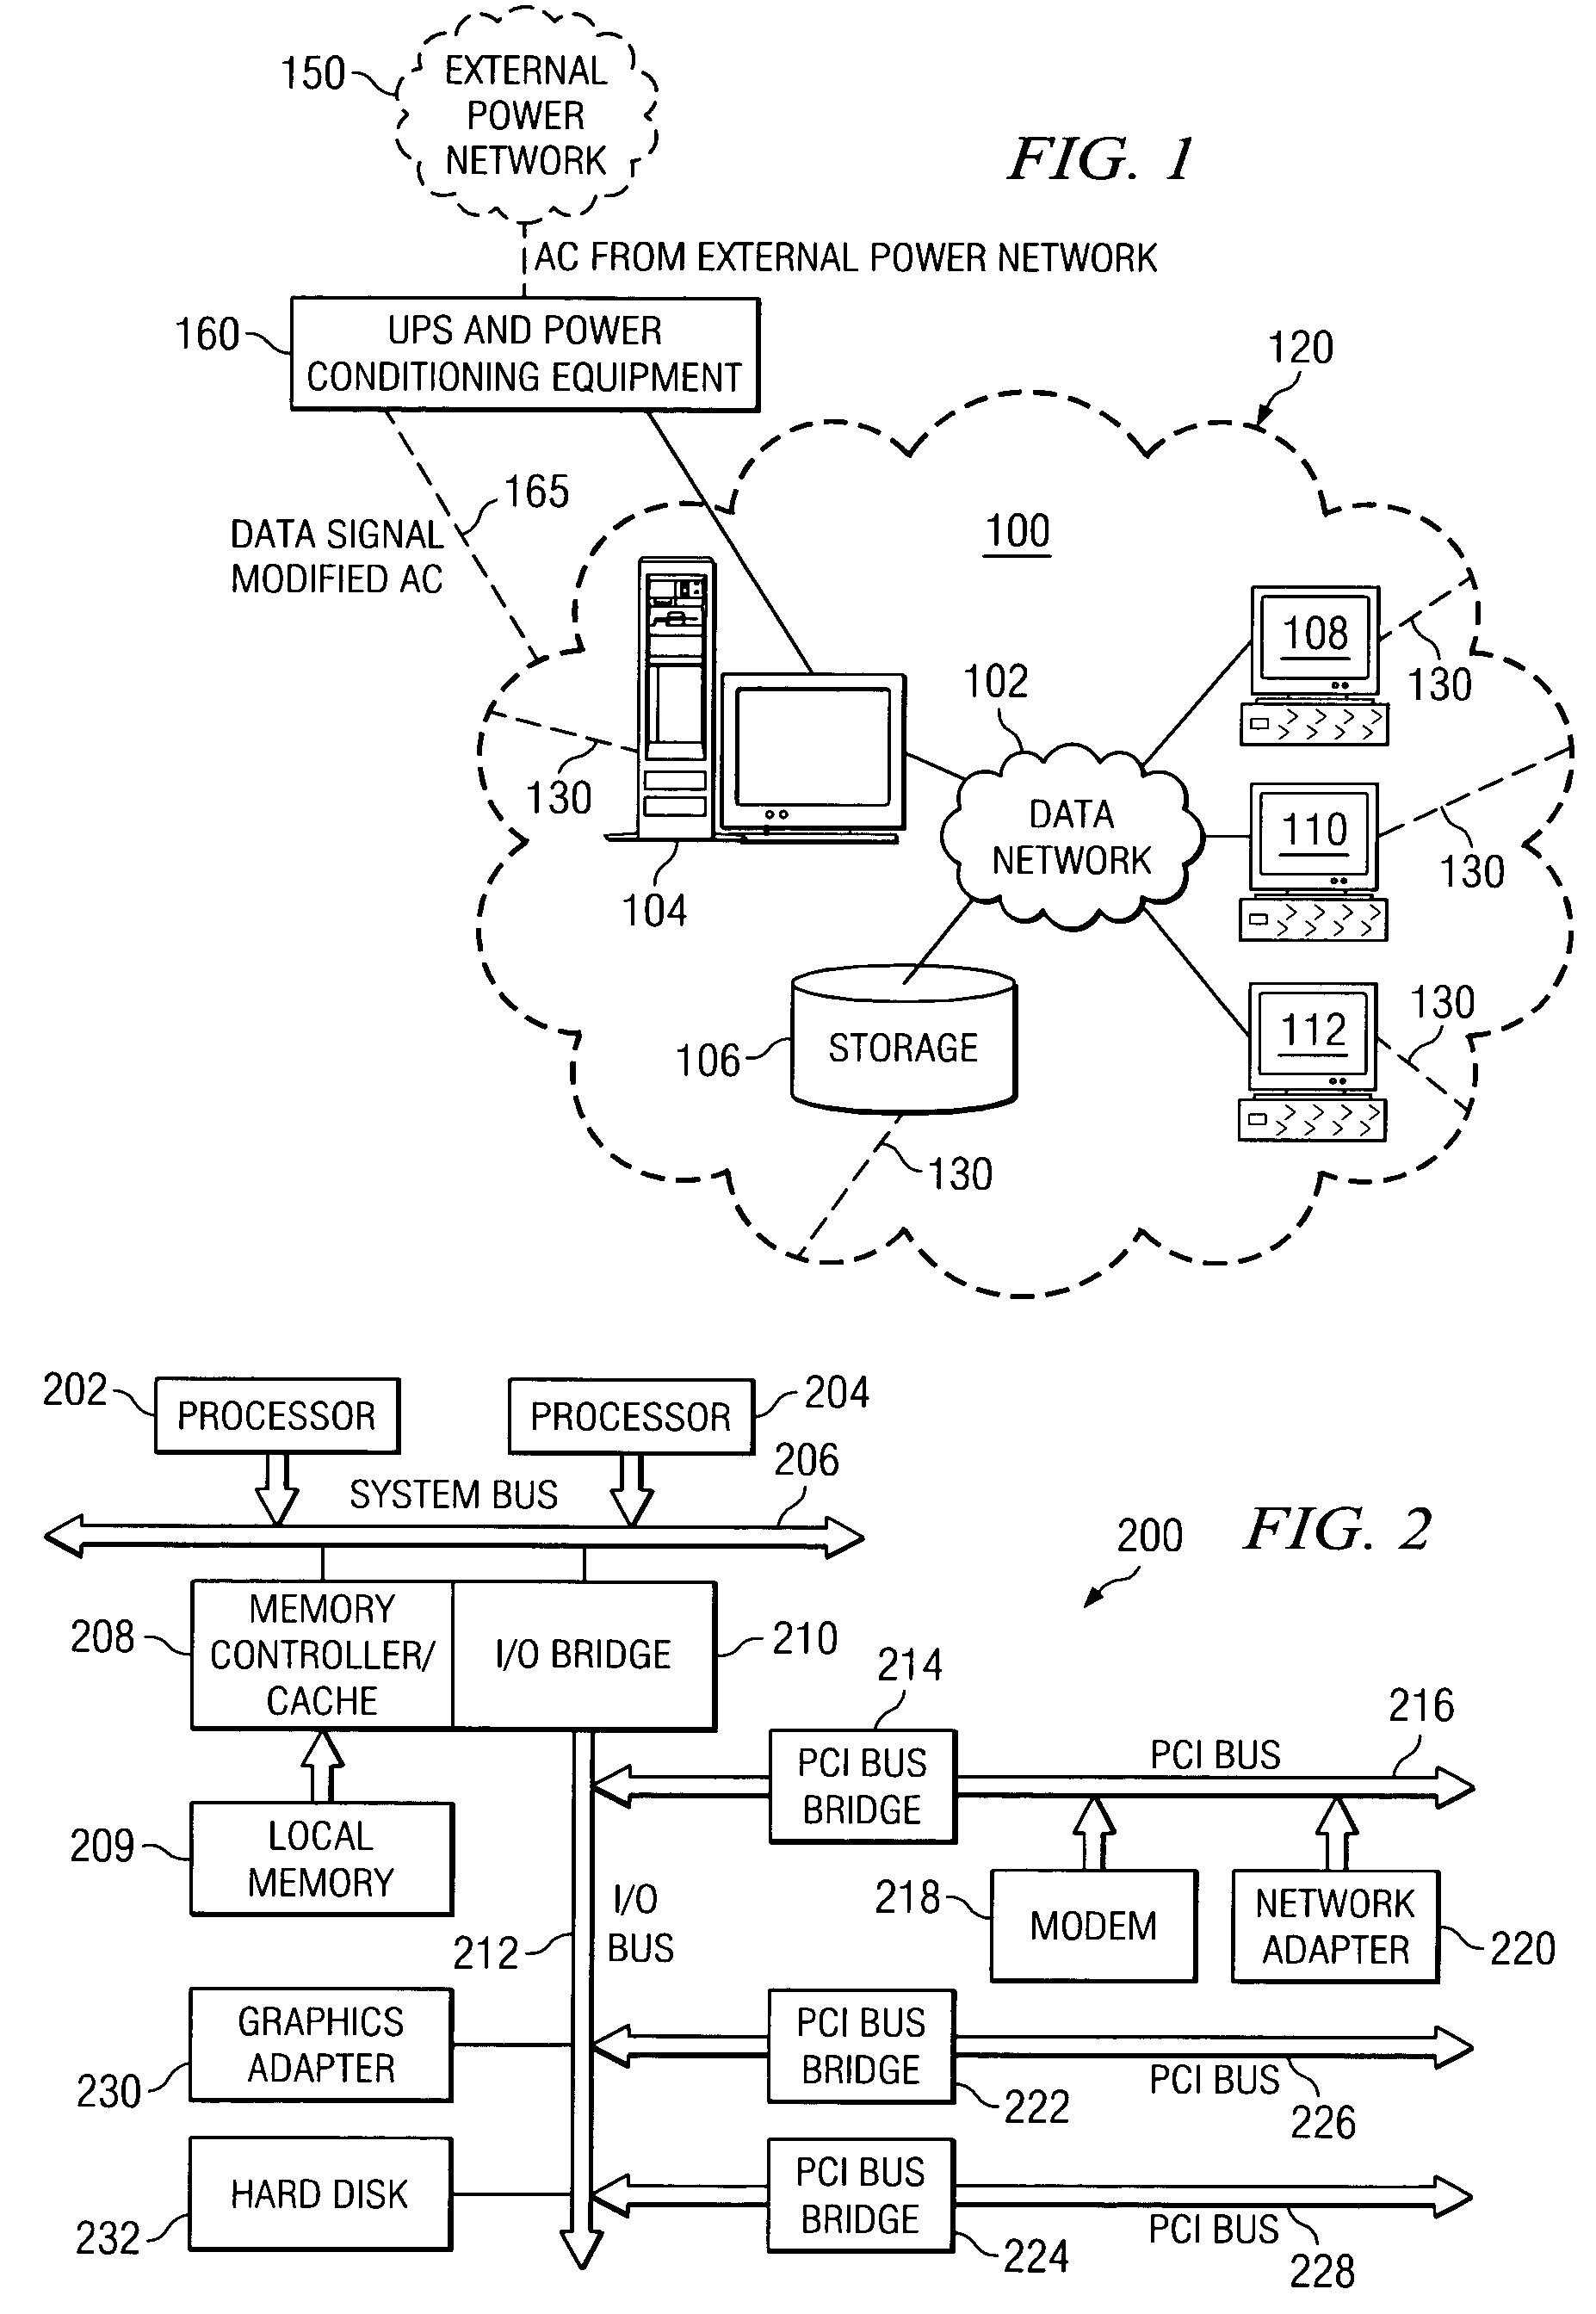 Apparatus and method for location specific authentication using powerline networking